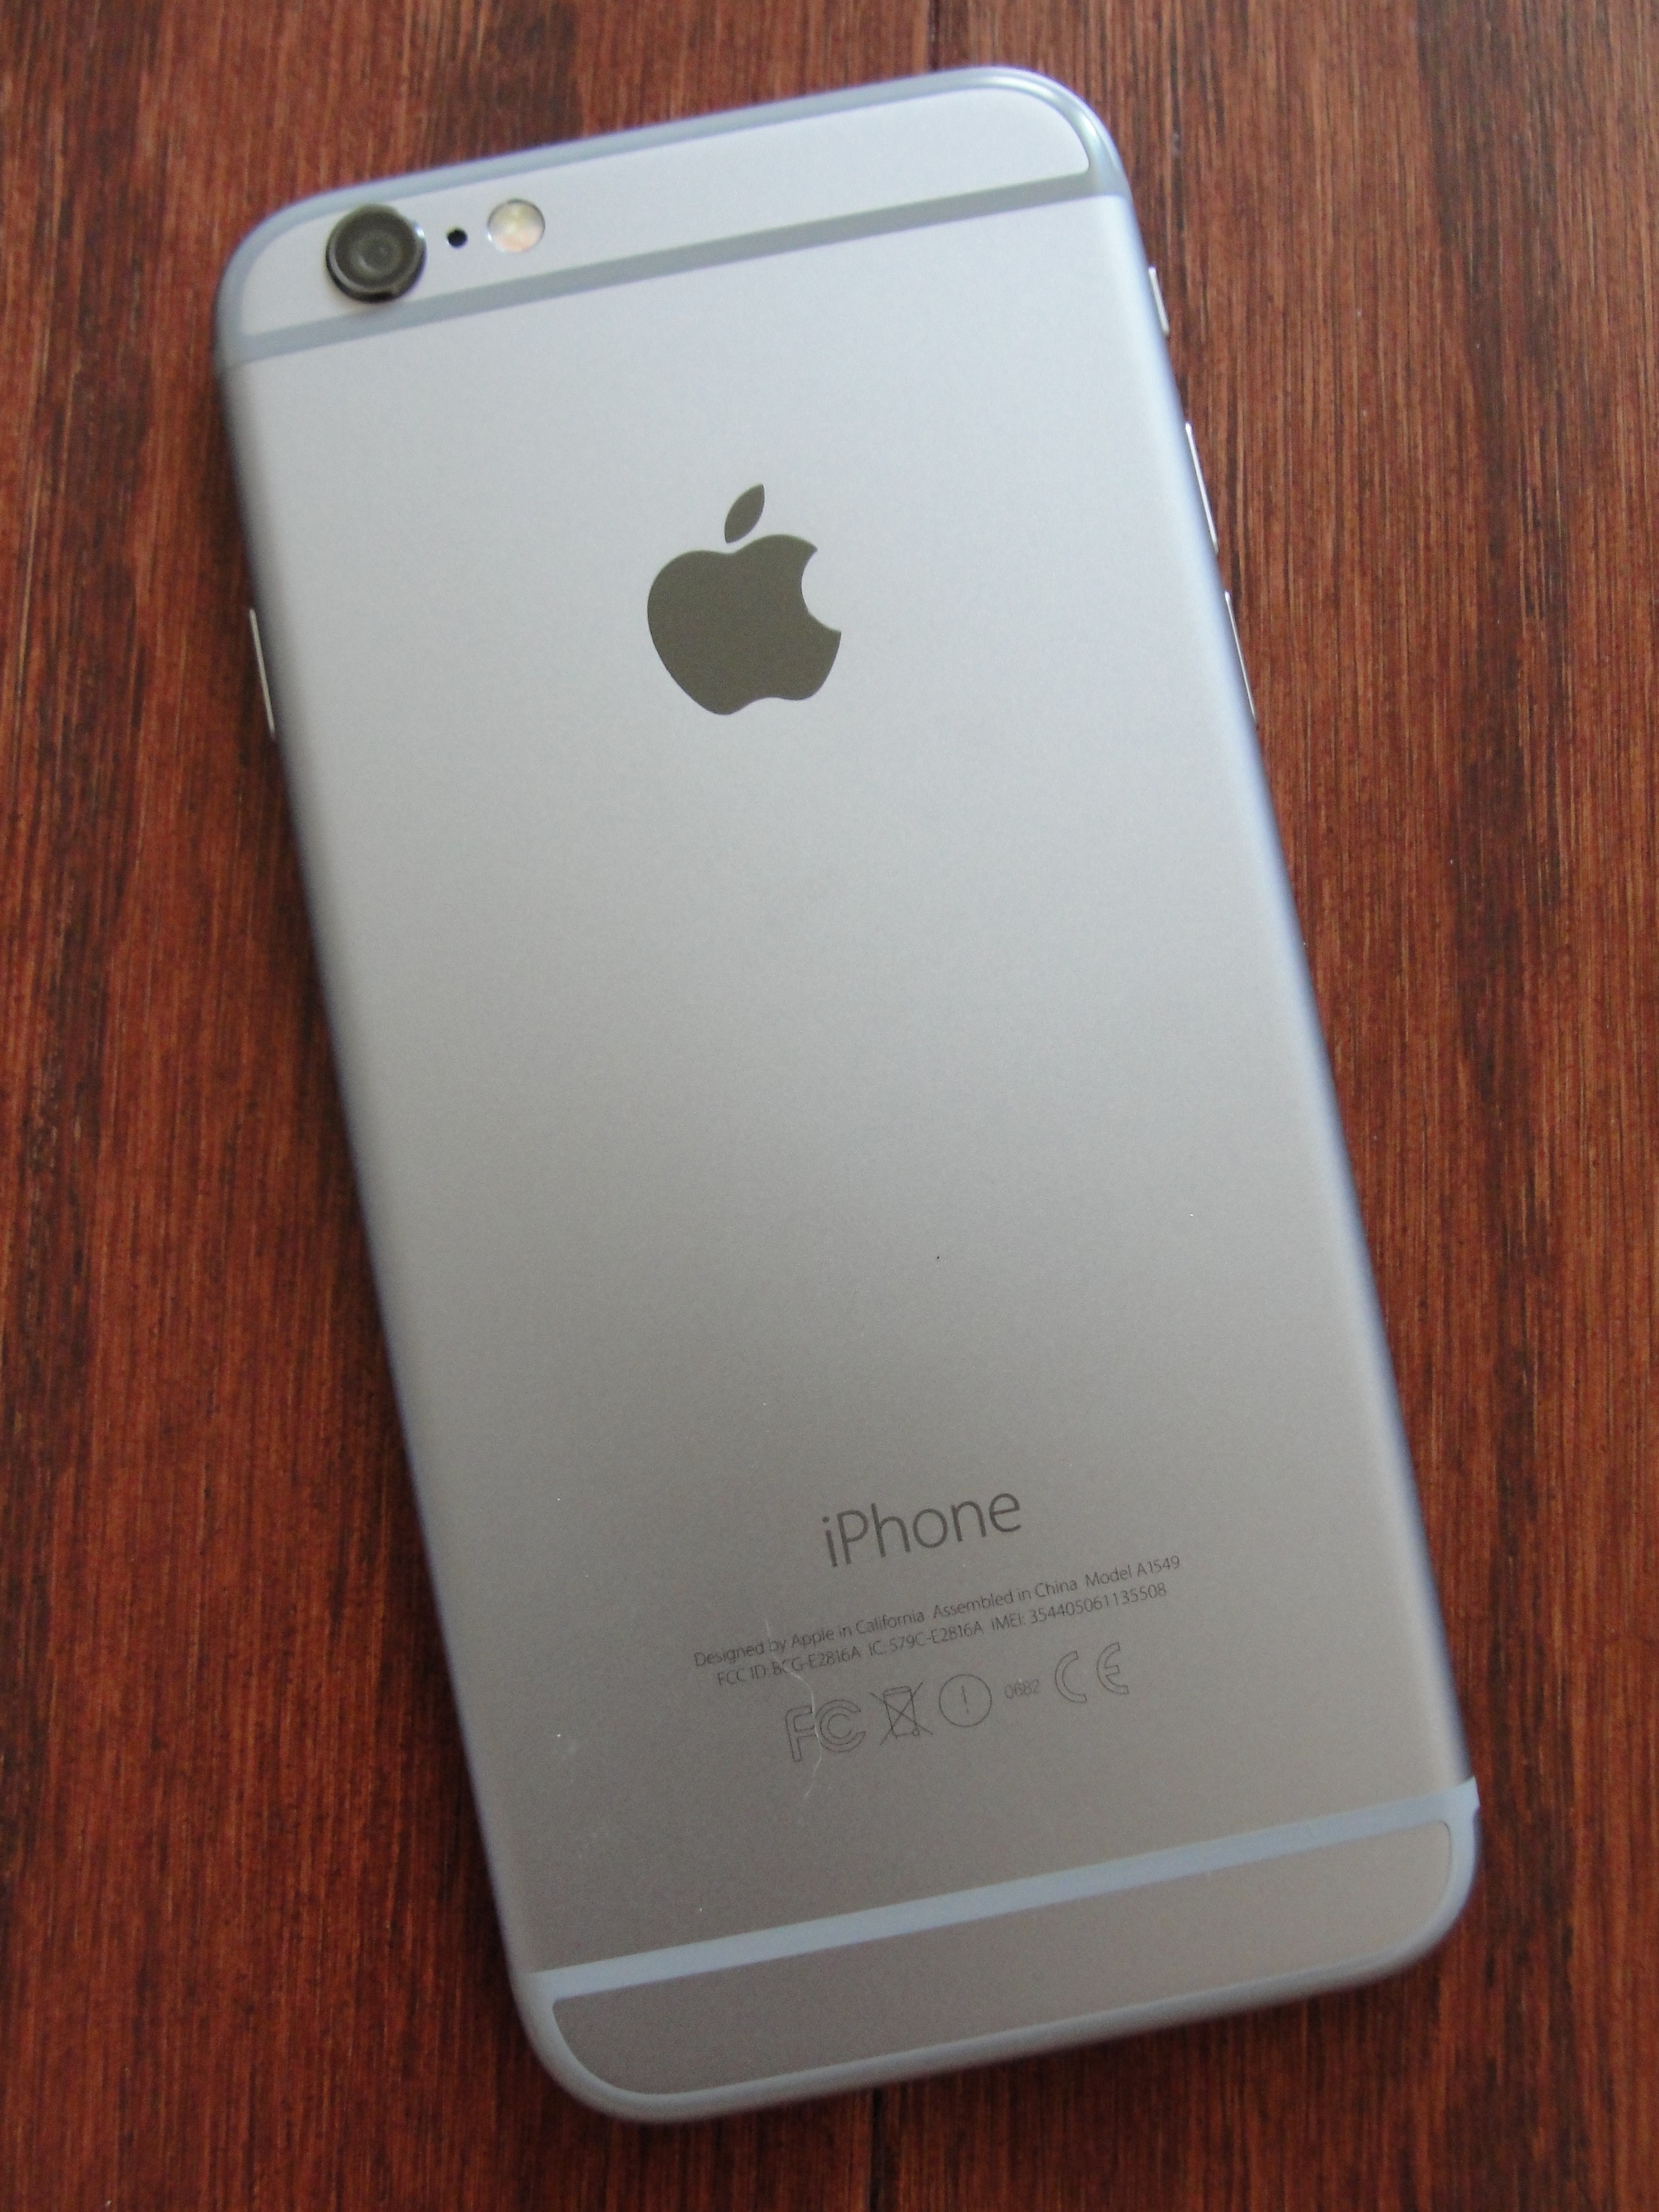 iPhone 6 in pictures « ((little fat notebook))